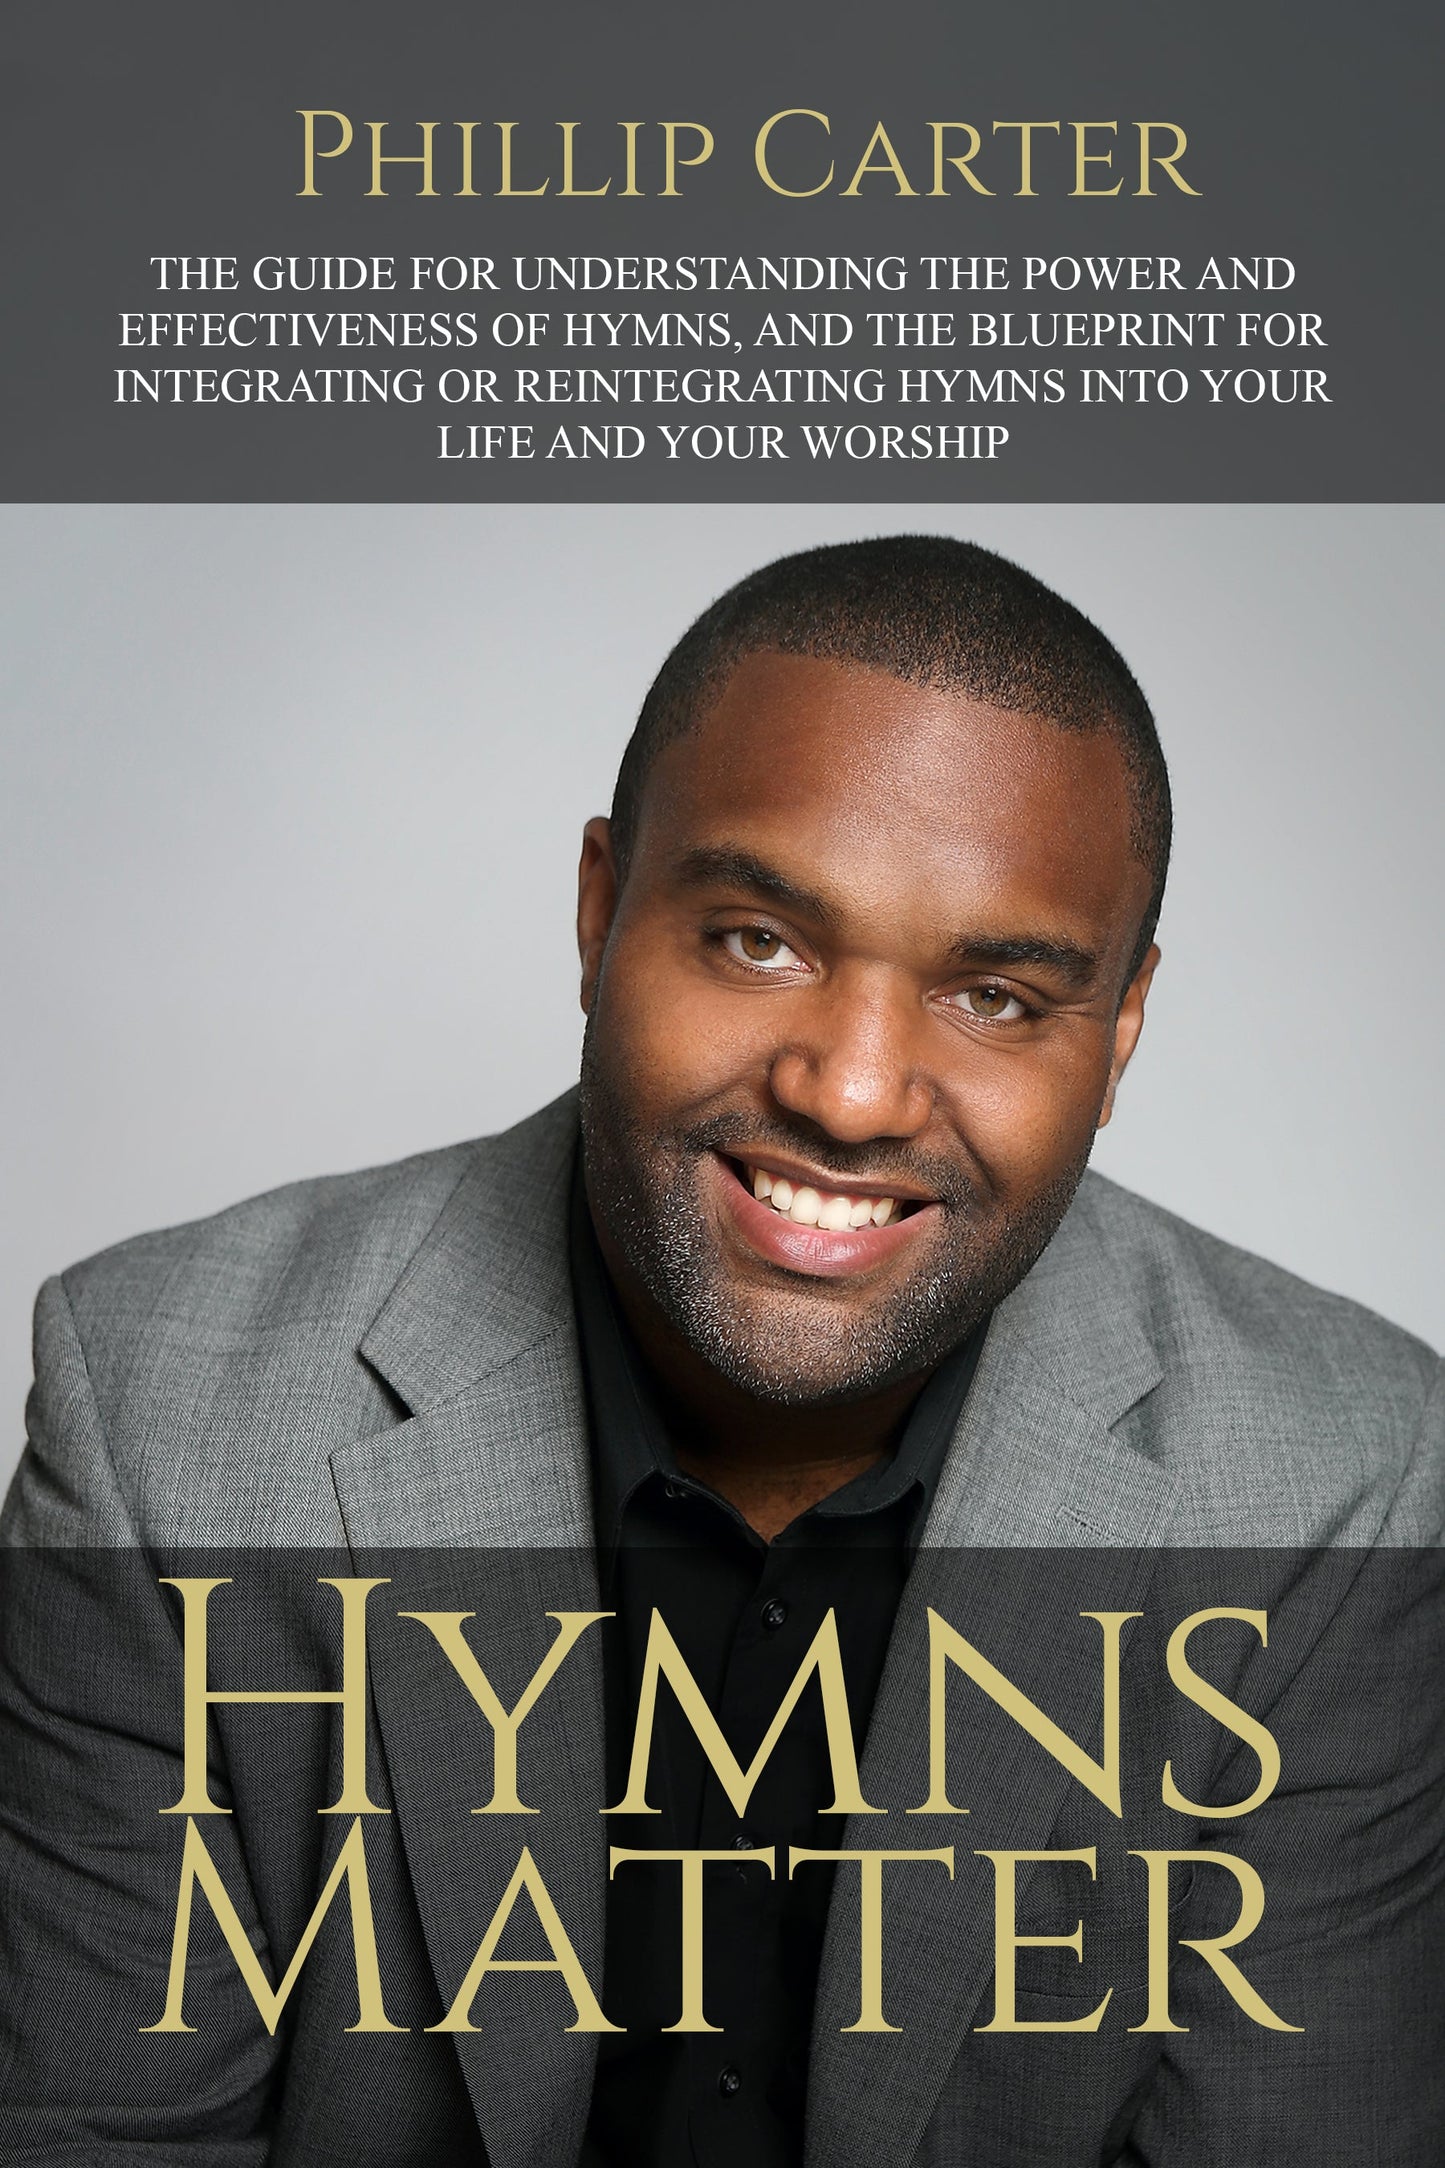 Hymns Matter: The Guide For Understanding The Power And Effectiveness Of Hymns...